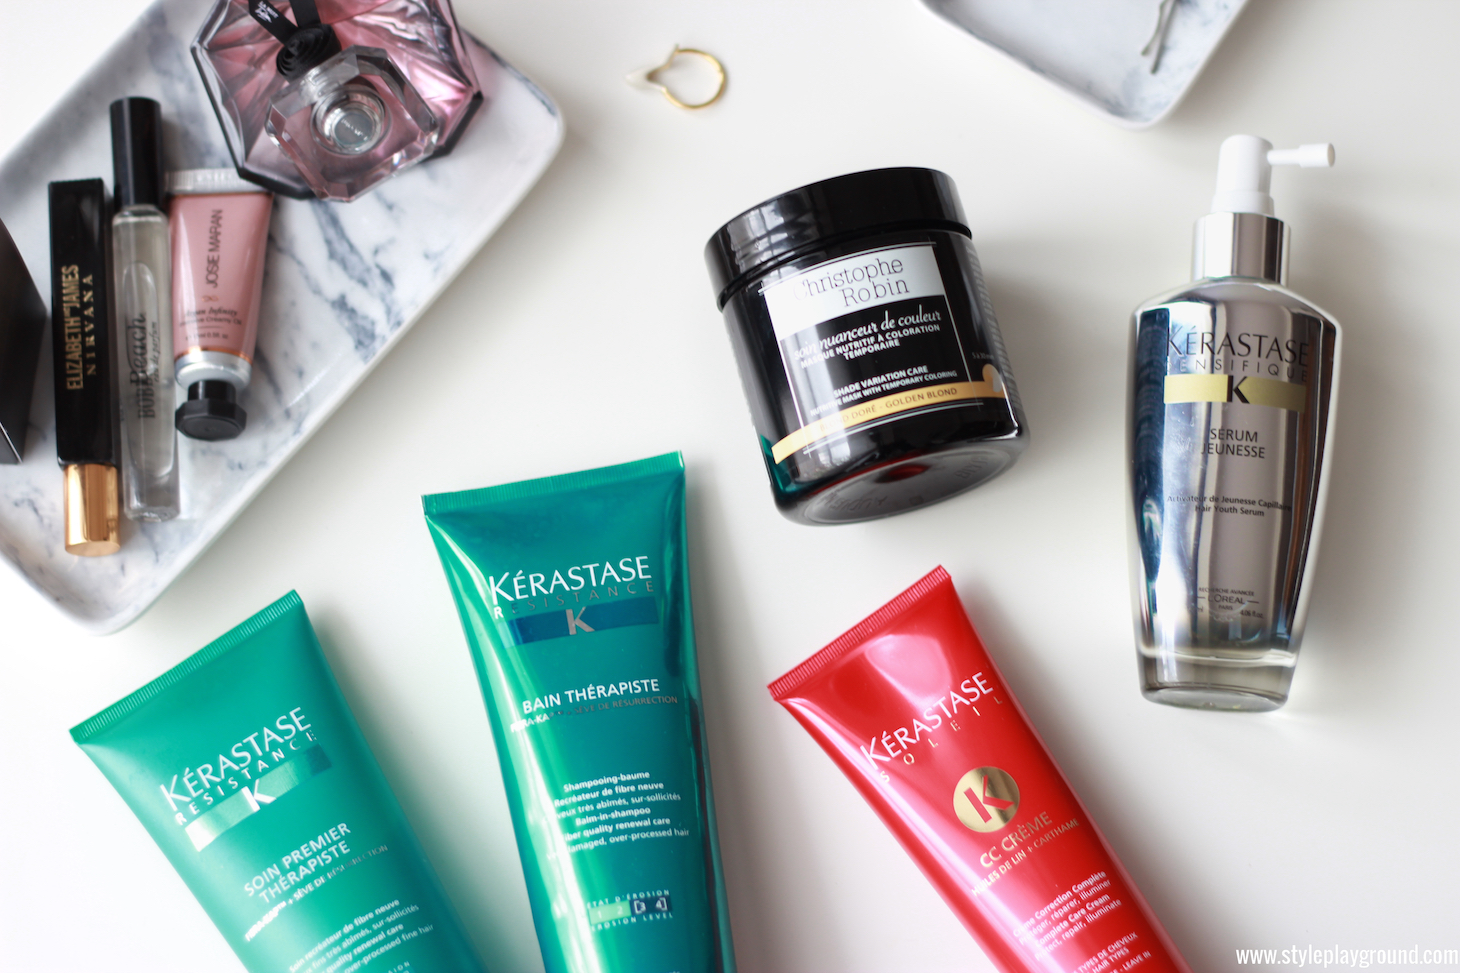 hair products I am loving right now